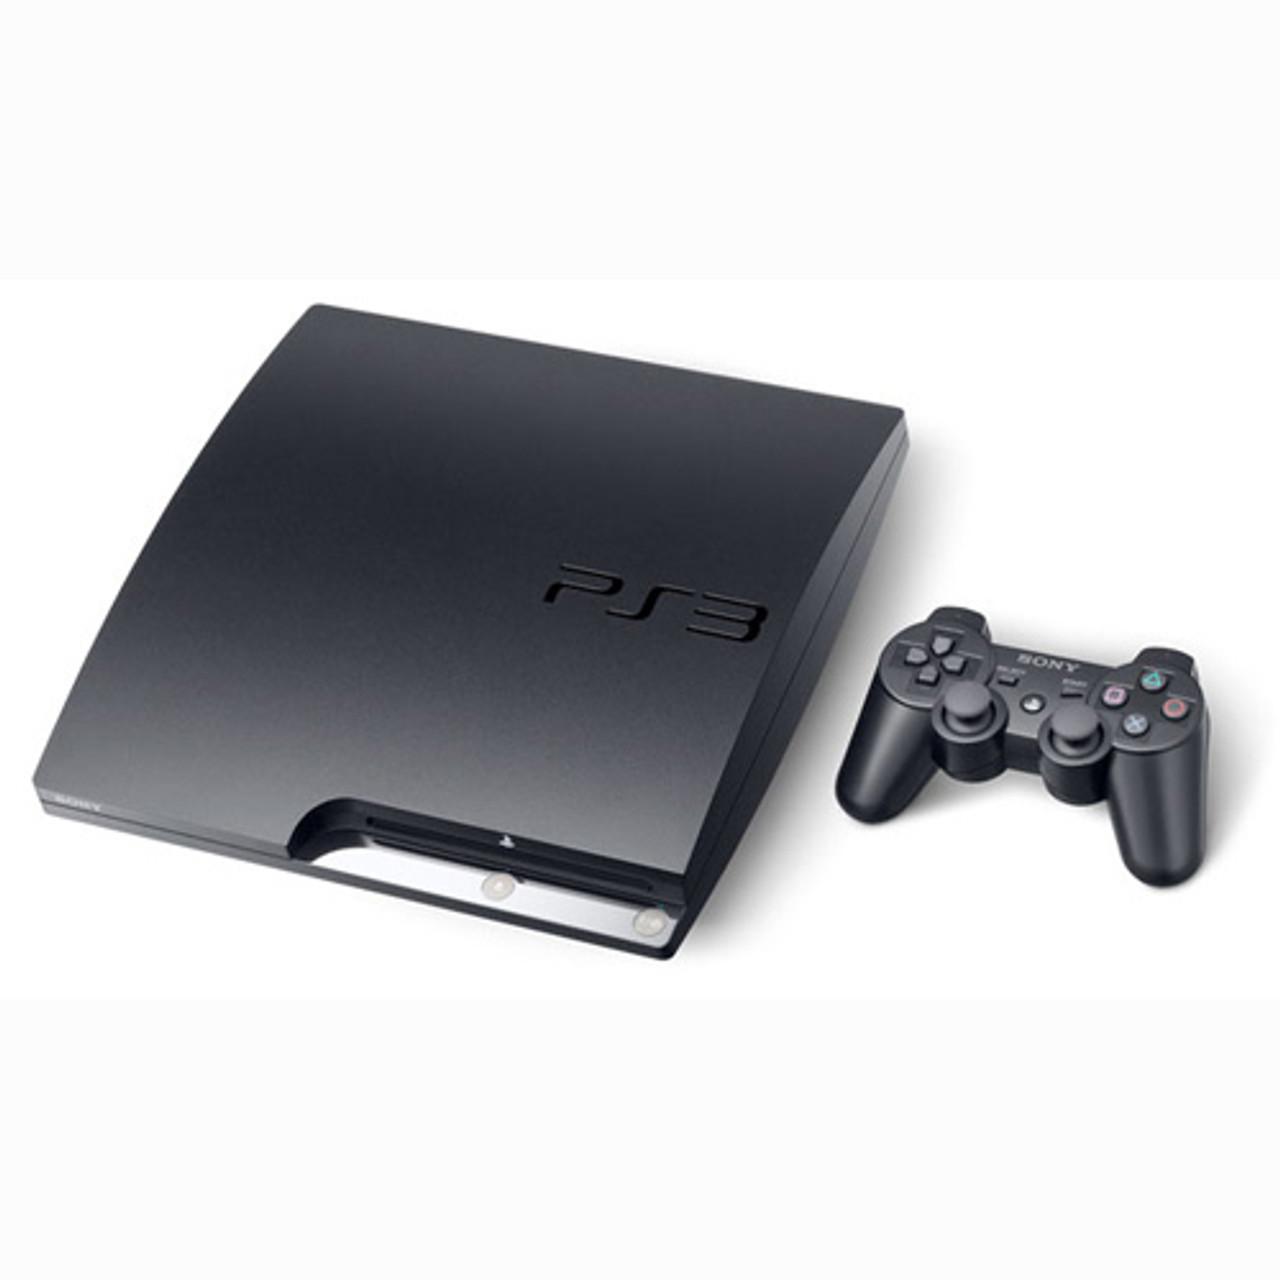 PS3 Slim 120GB System Console Sale | DKOldies